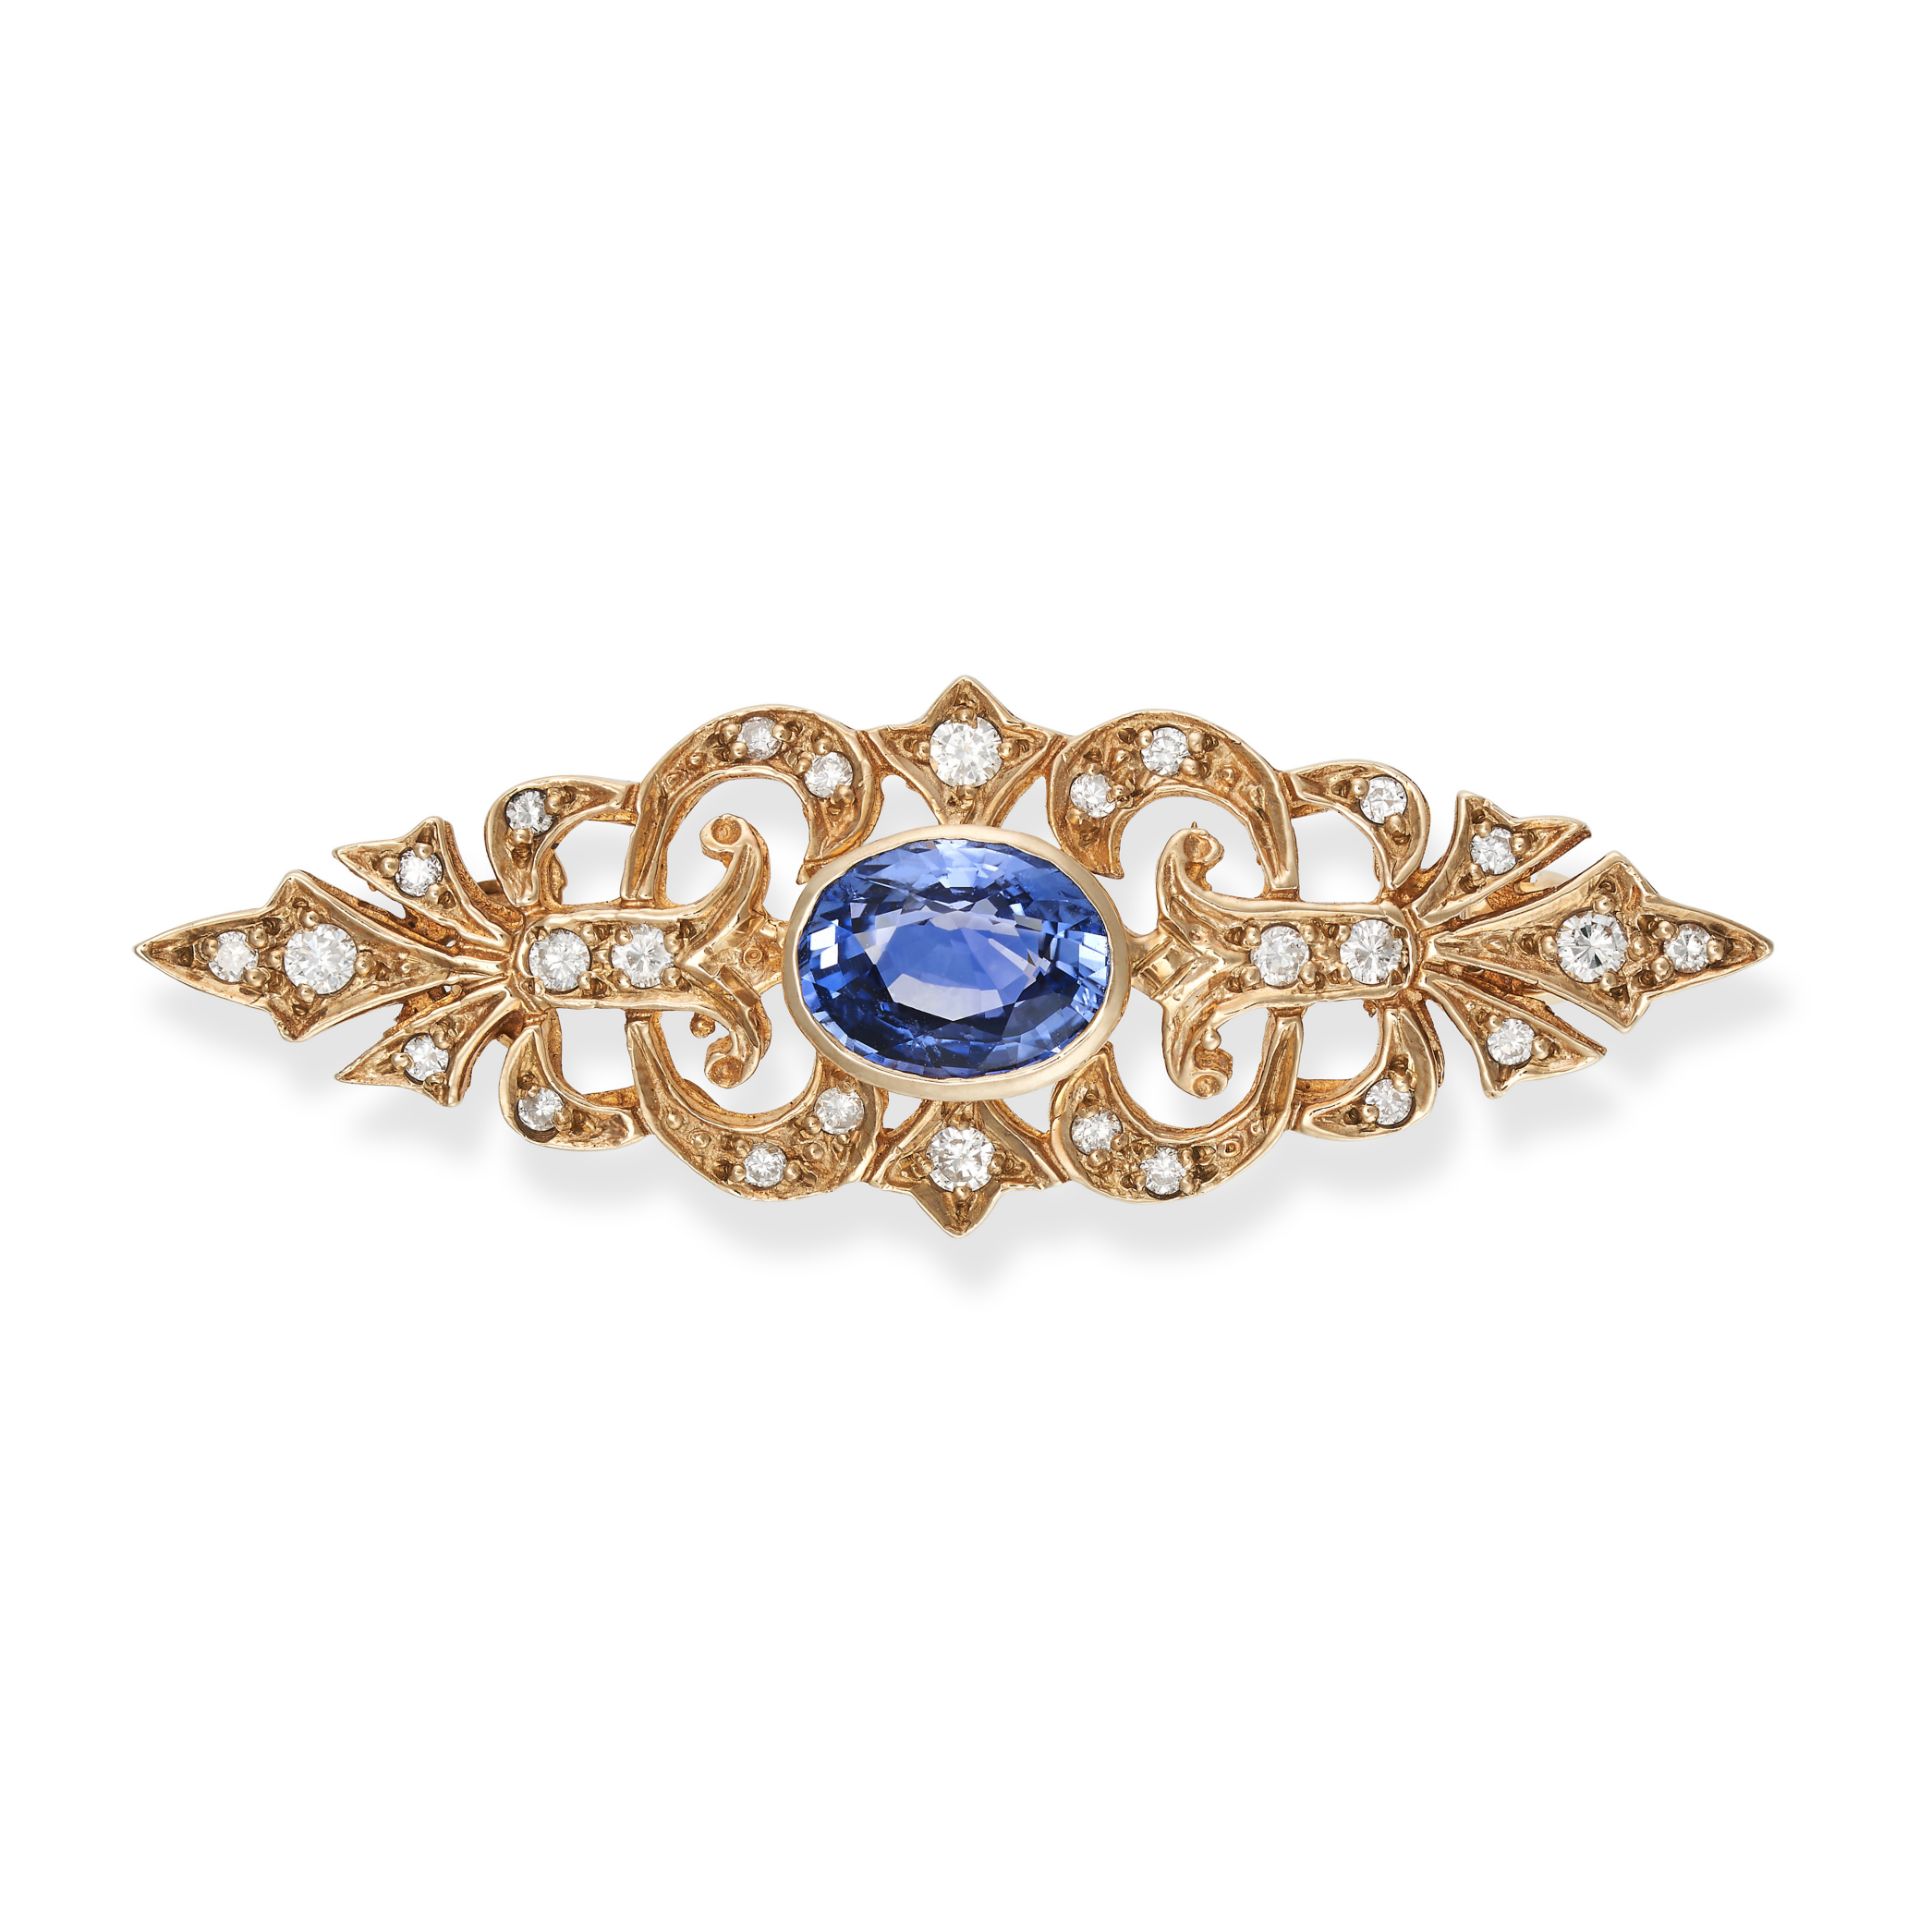 A SAPPHIRE AND DIAMOND BROOCH in 9ct yellow gold, the openwork brooch set with an oval cut sapphi...